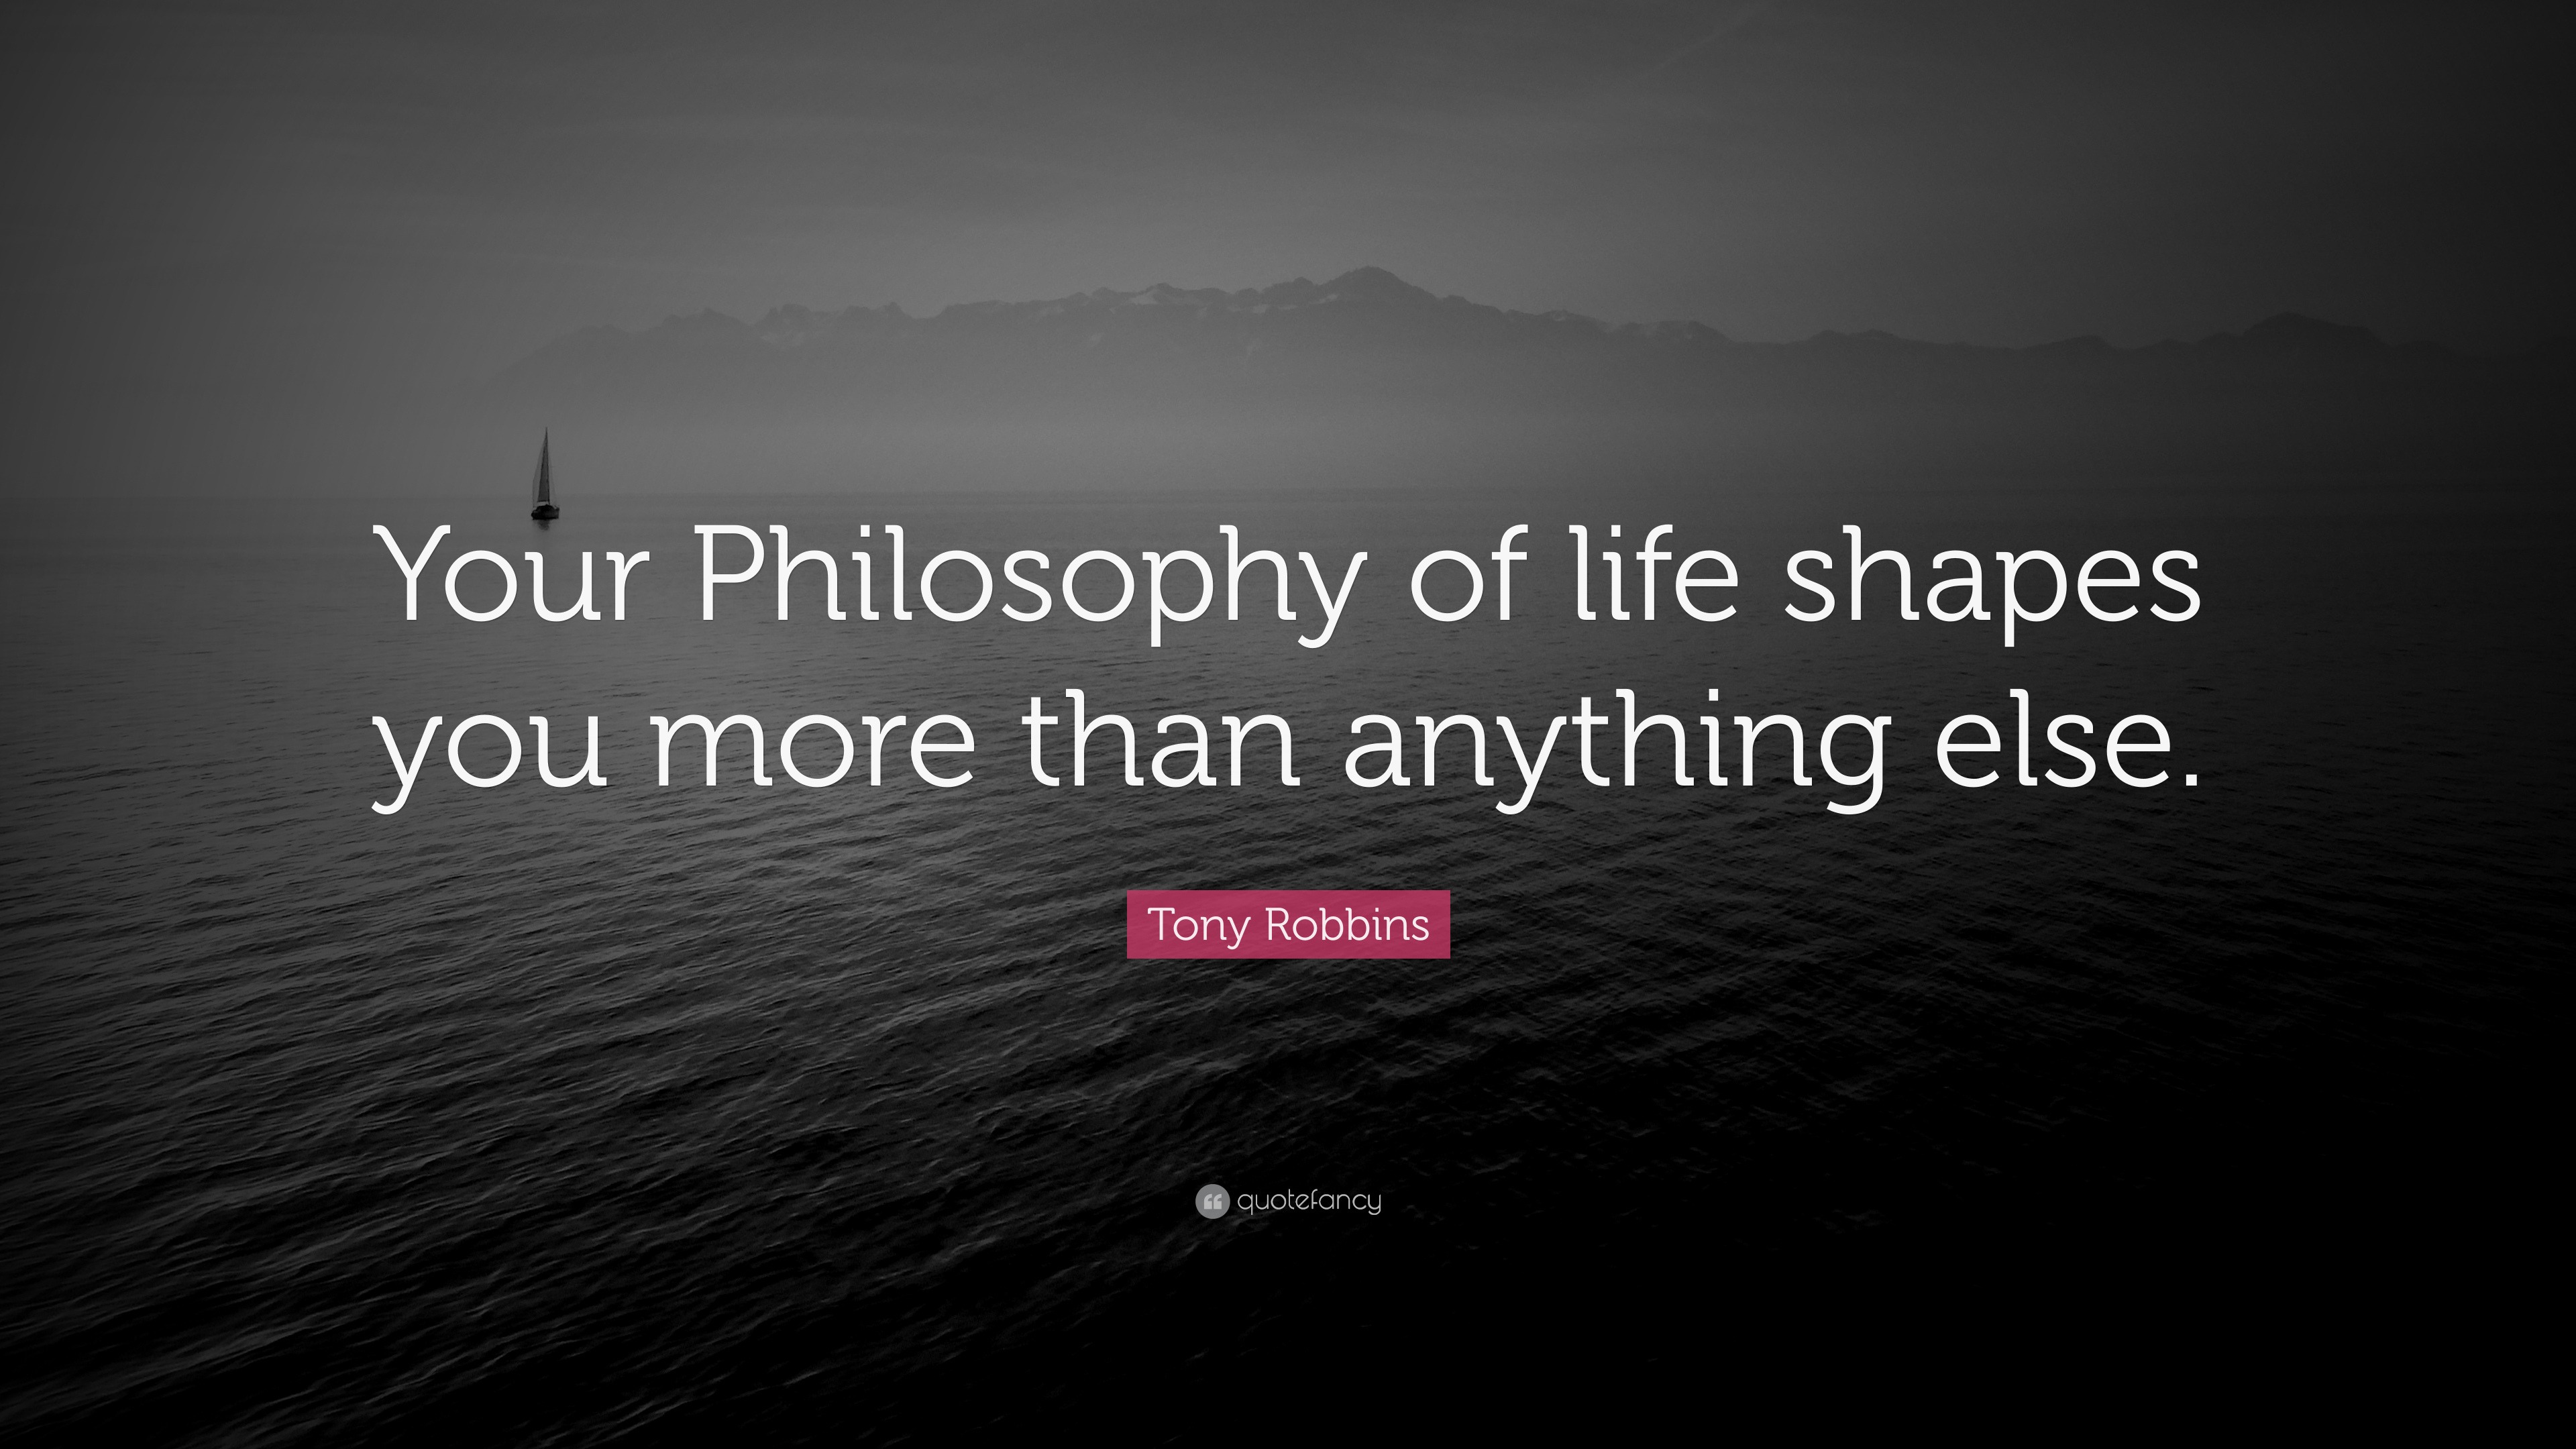 Tony Robbins Quote “Your Philosophy of life shapes you